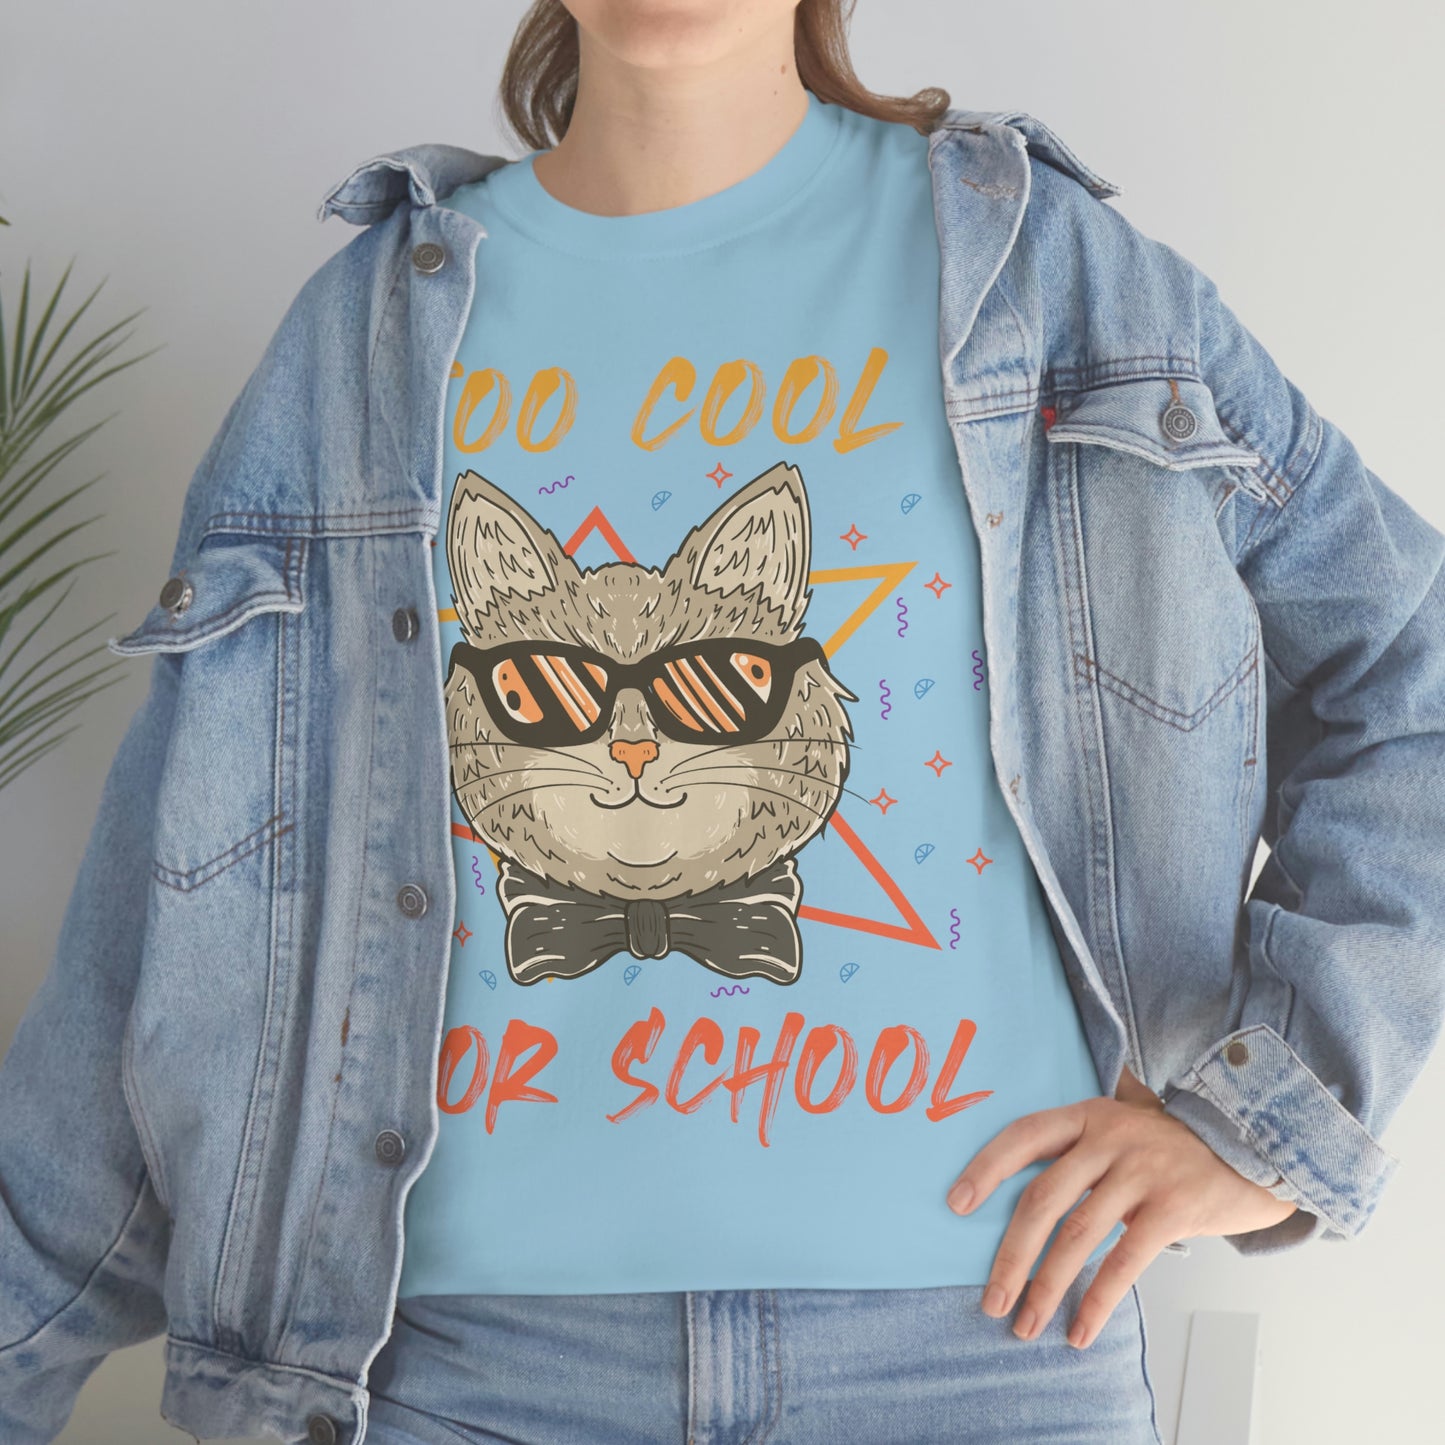 Too Cool for School Cotton Tee